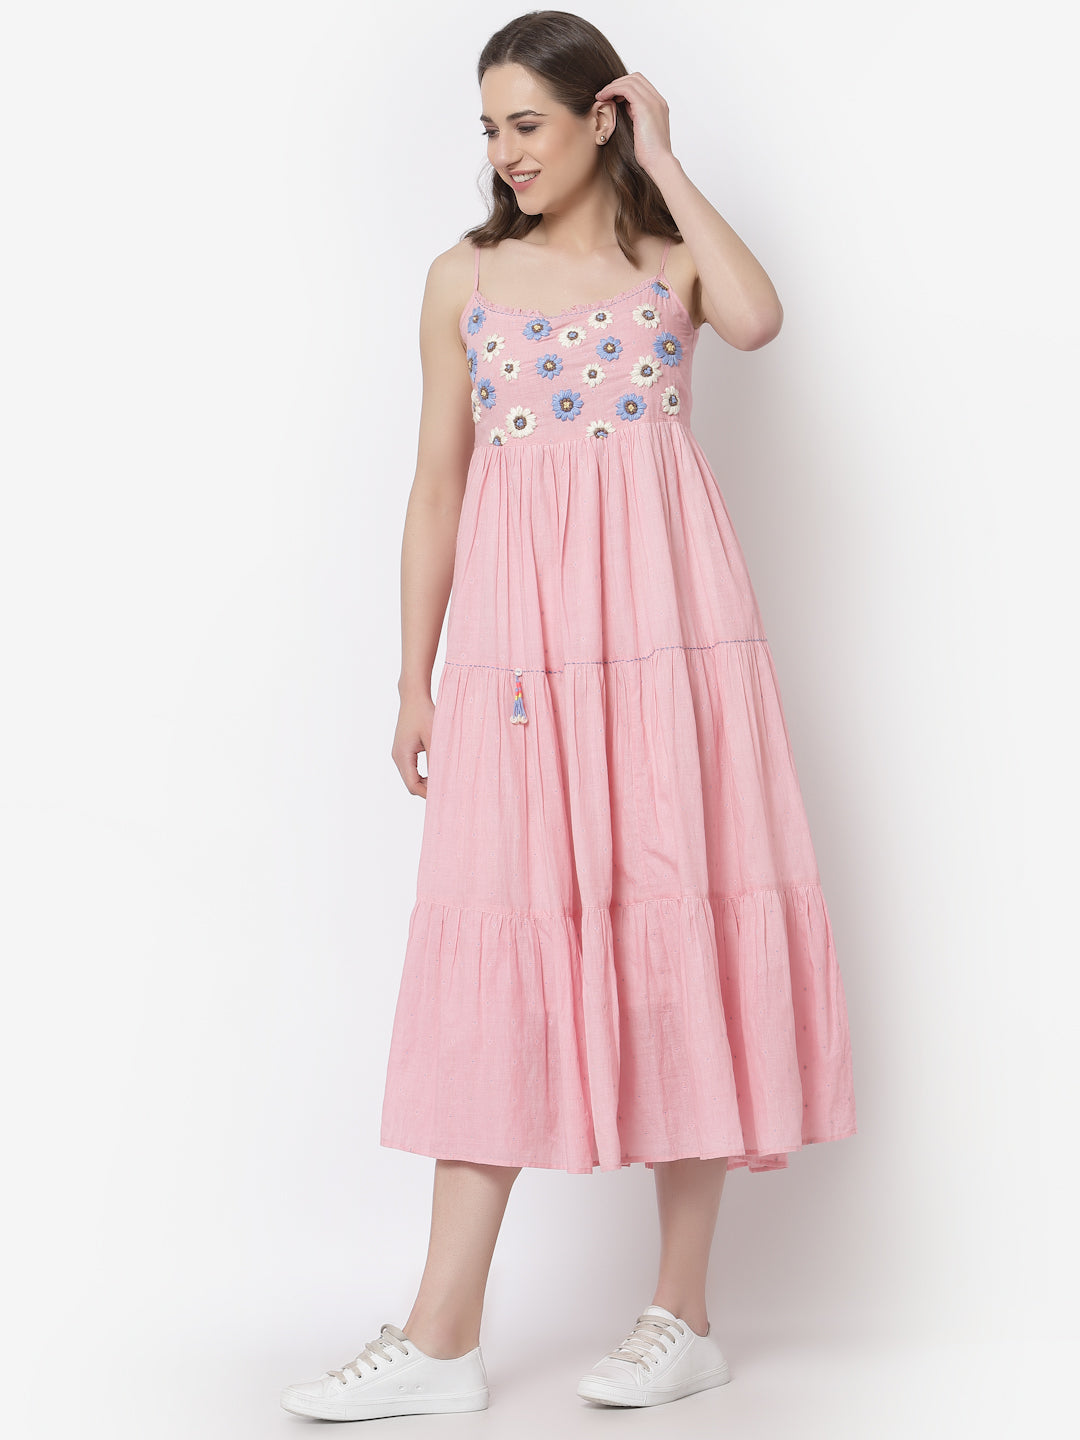 Terquois Pink Cotton Casual Shoulder Straps Dress Emblished with Hand Embroidery Dresses TERQUOIS   